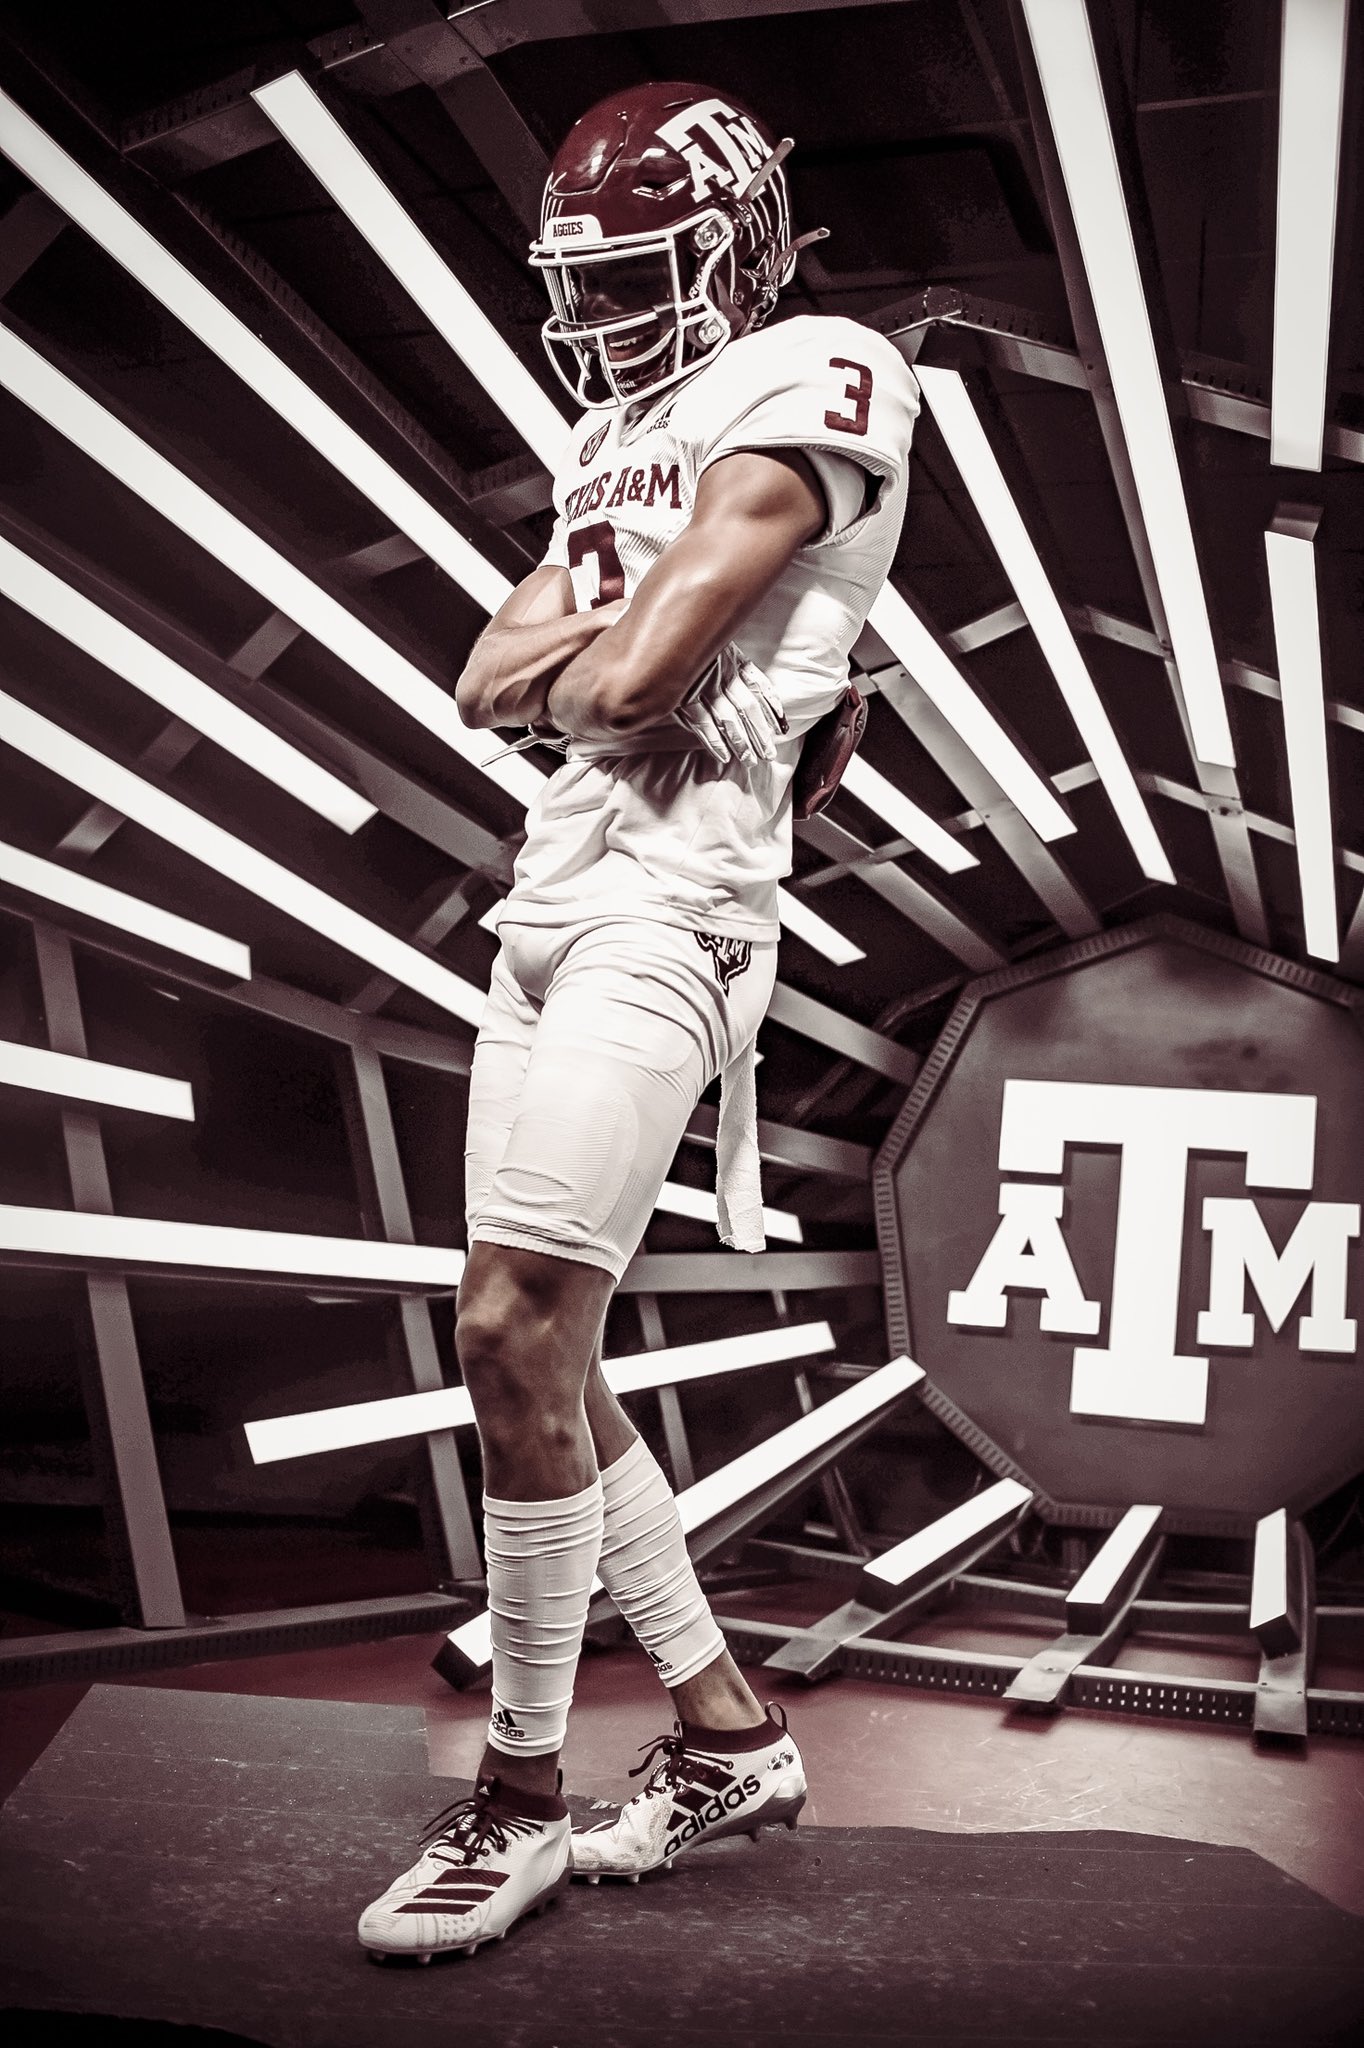 Josh Thomas' Younger Brother Noah Thomas Commits To Play For The Aggies